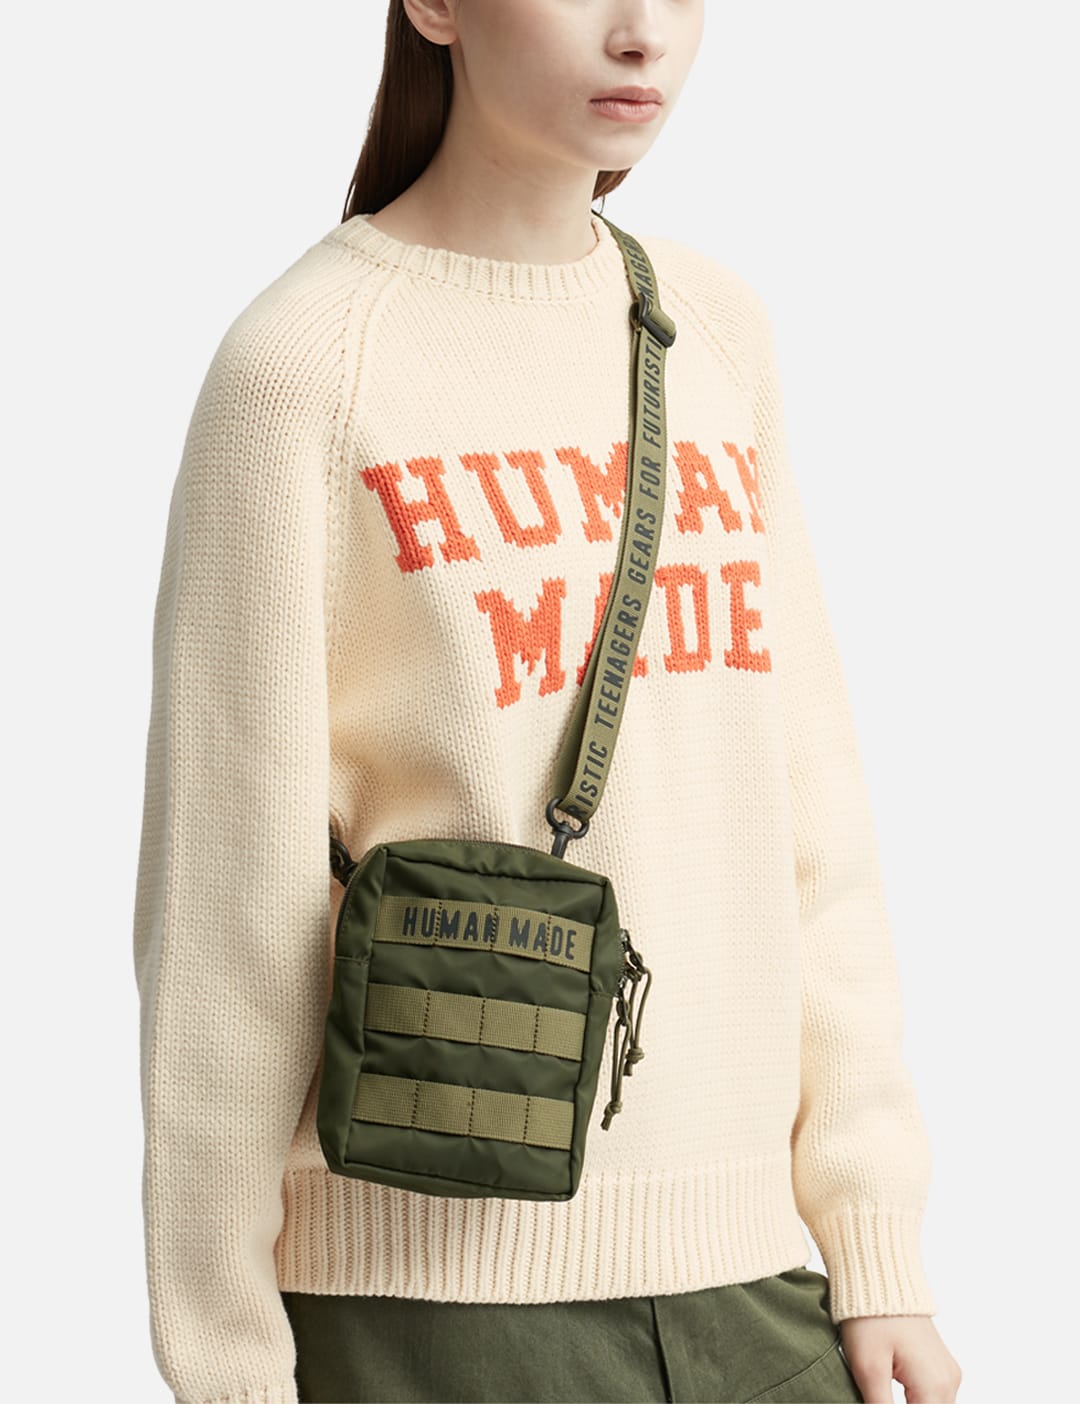 Human Made - Military Pouch #2 | HBX - Globally Curated Fashion